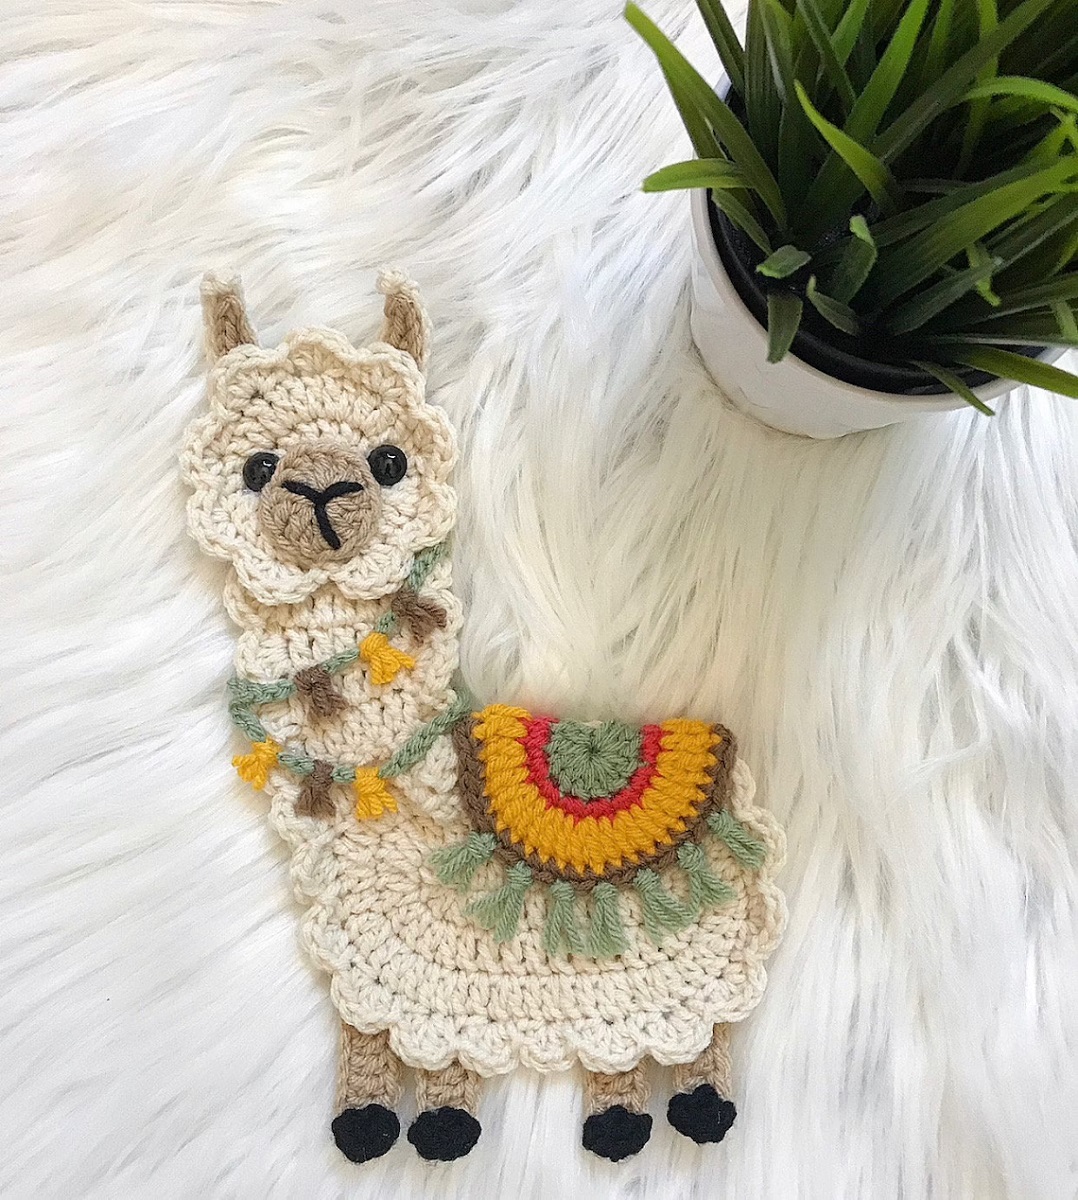 Flat crochet cream llama with a doily style face and body and teal and yellow tassels around its neck and the seat on its middle.